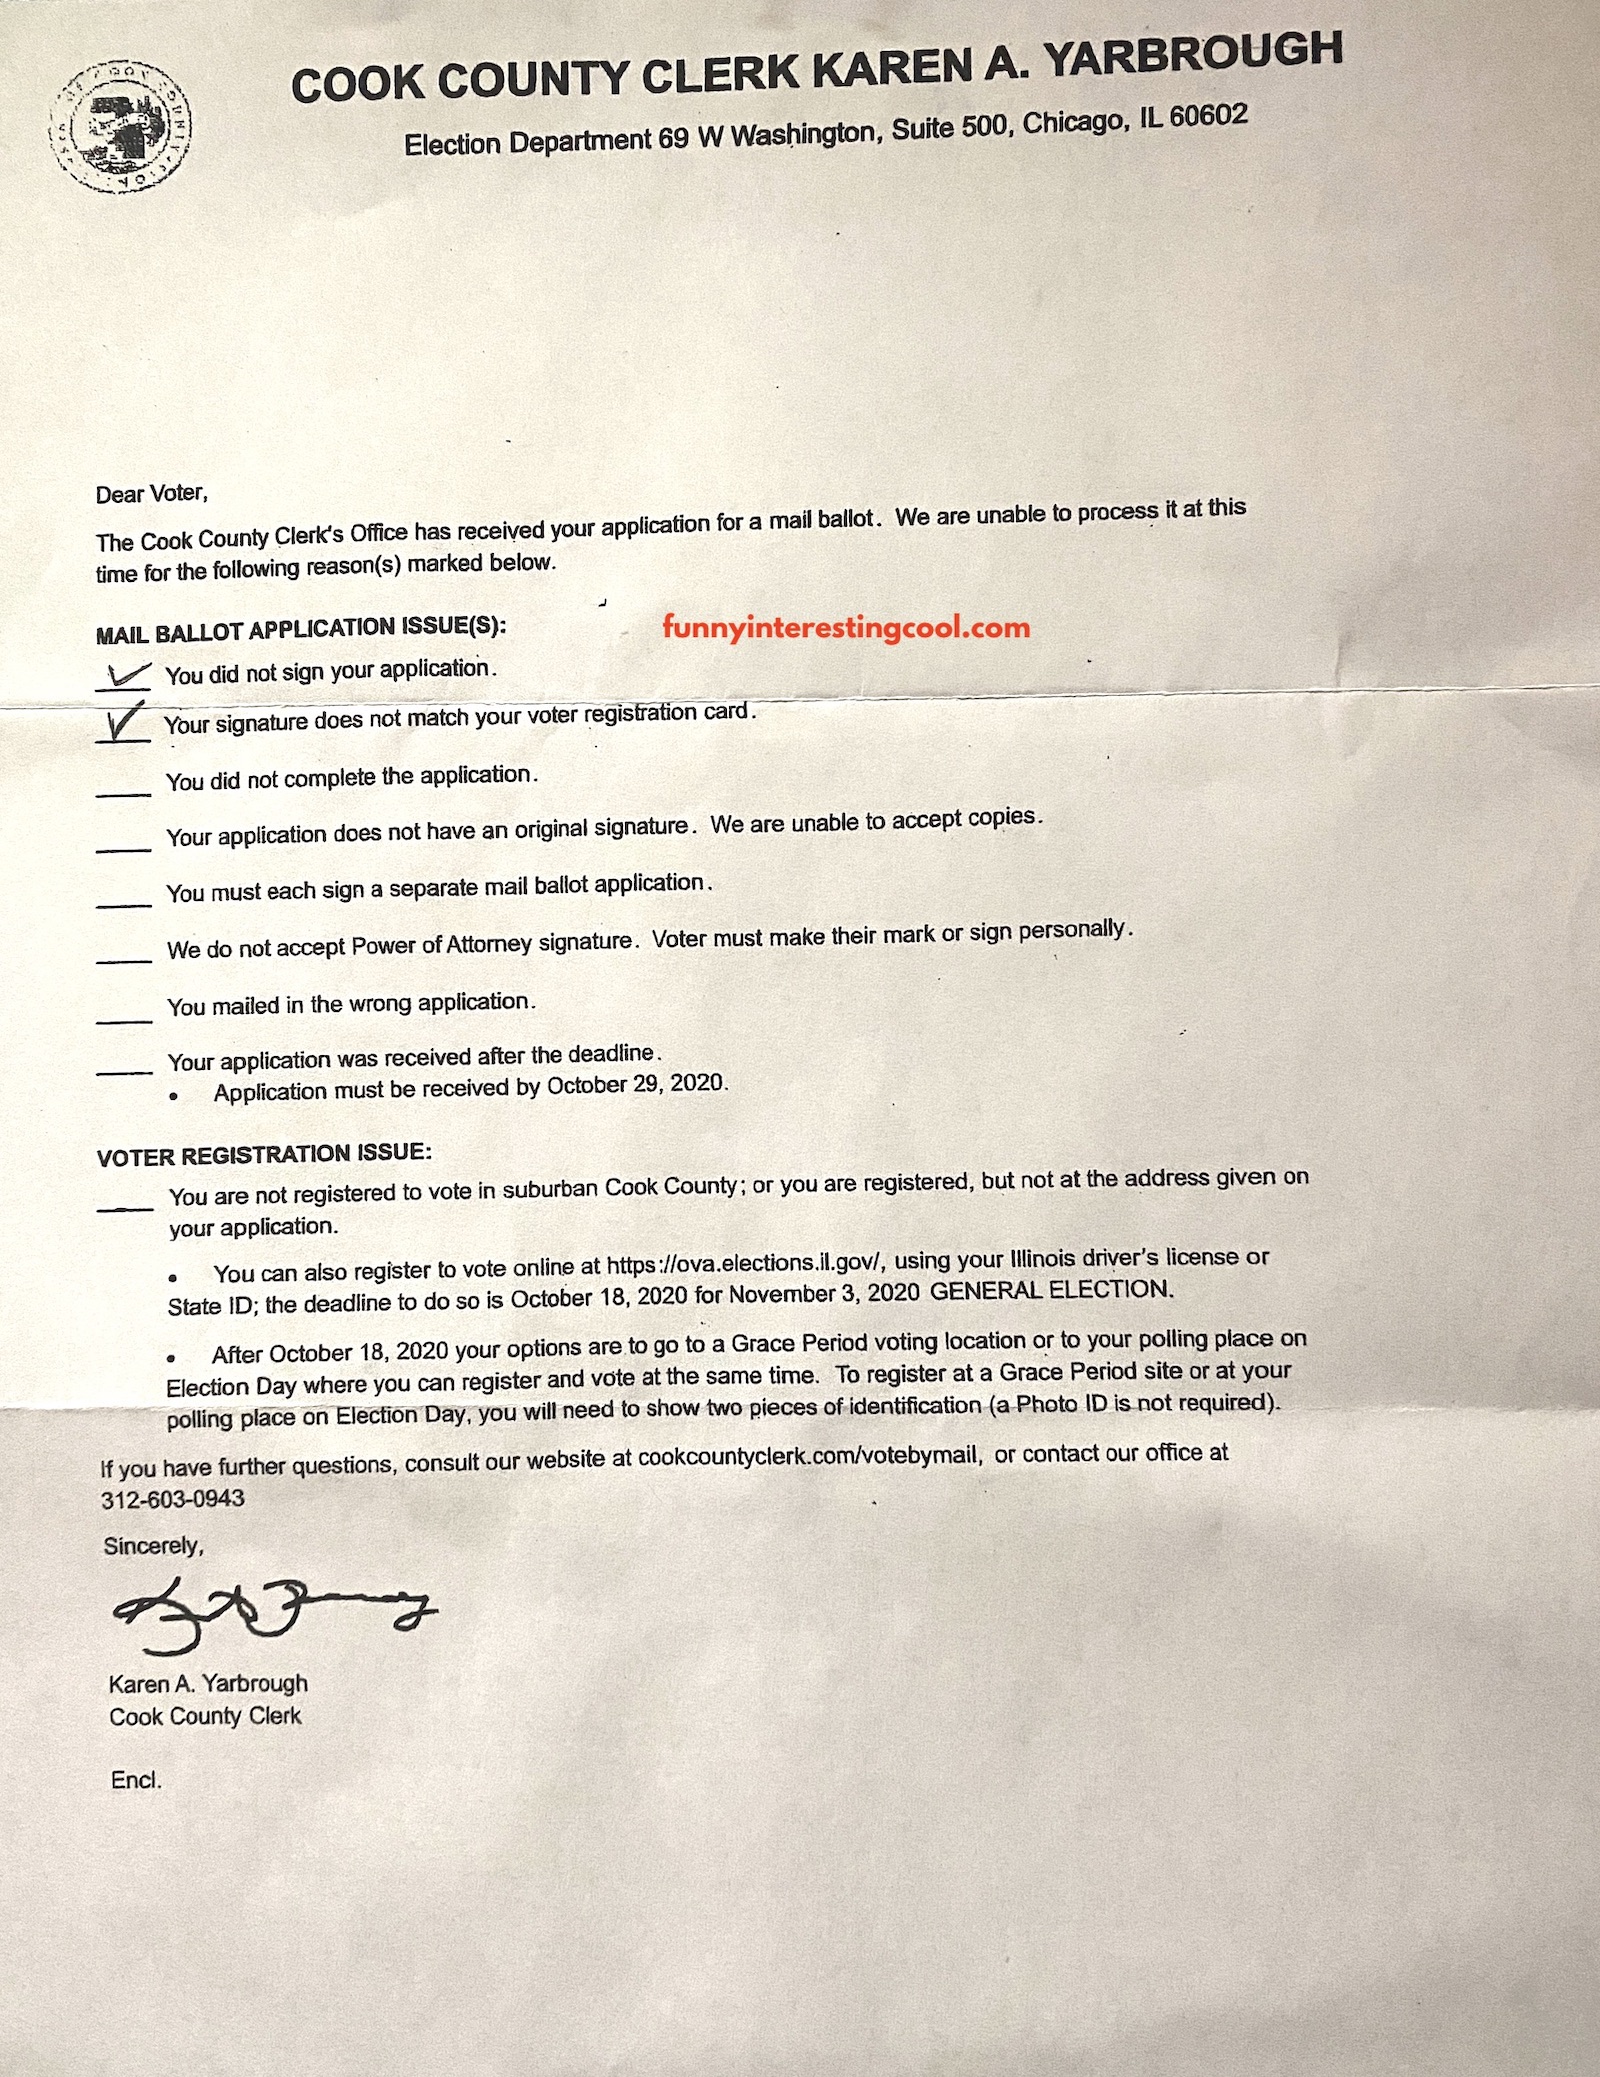 Dear Voter The Cook County Clerks Office Reviewed Your Application For A Mail Ballot